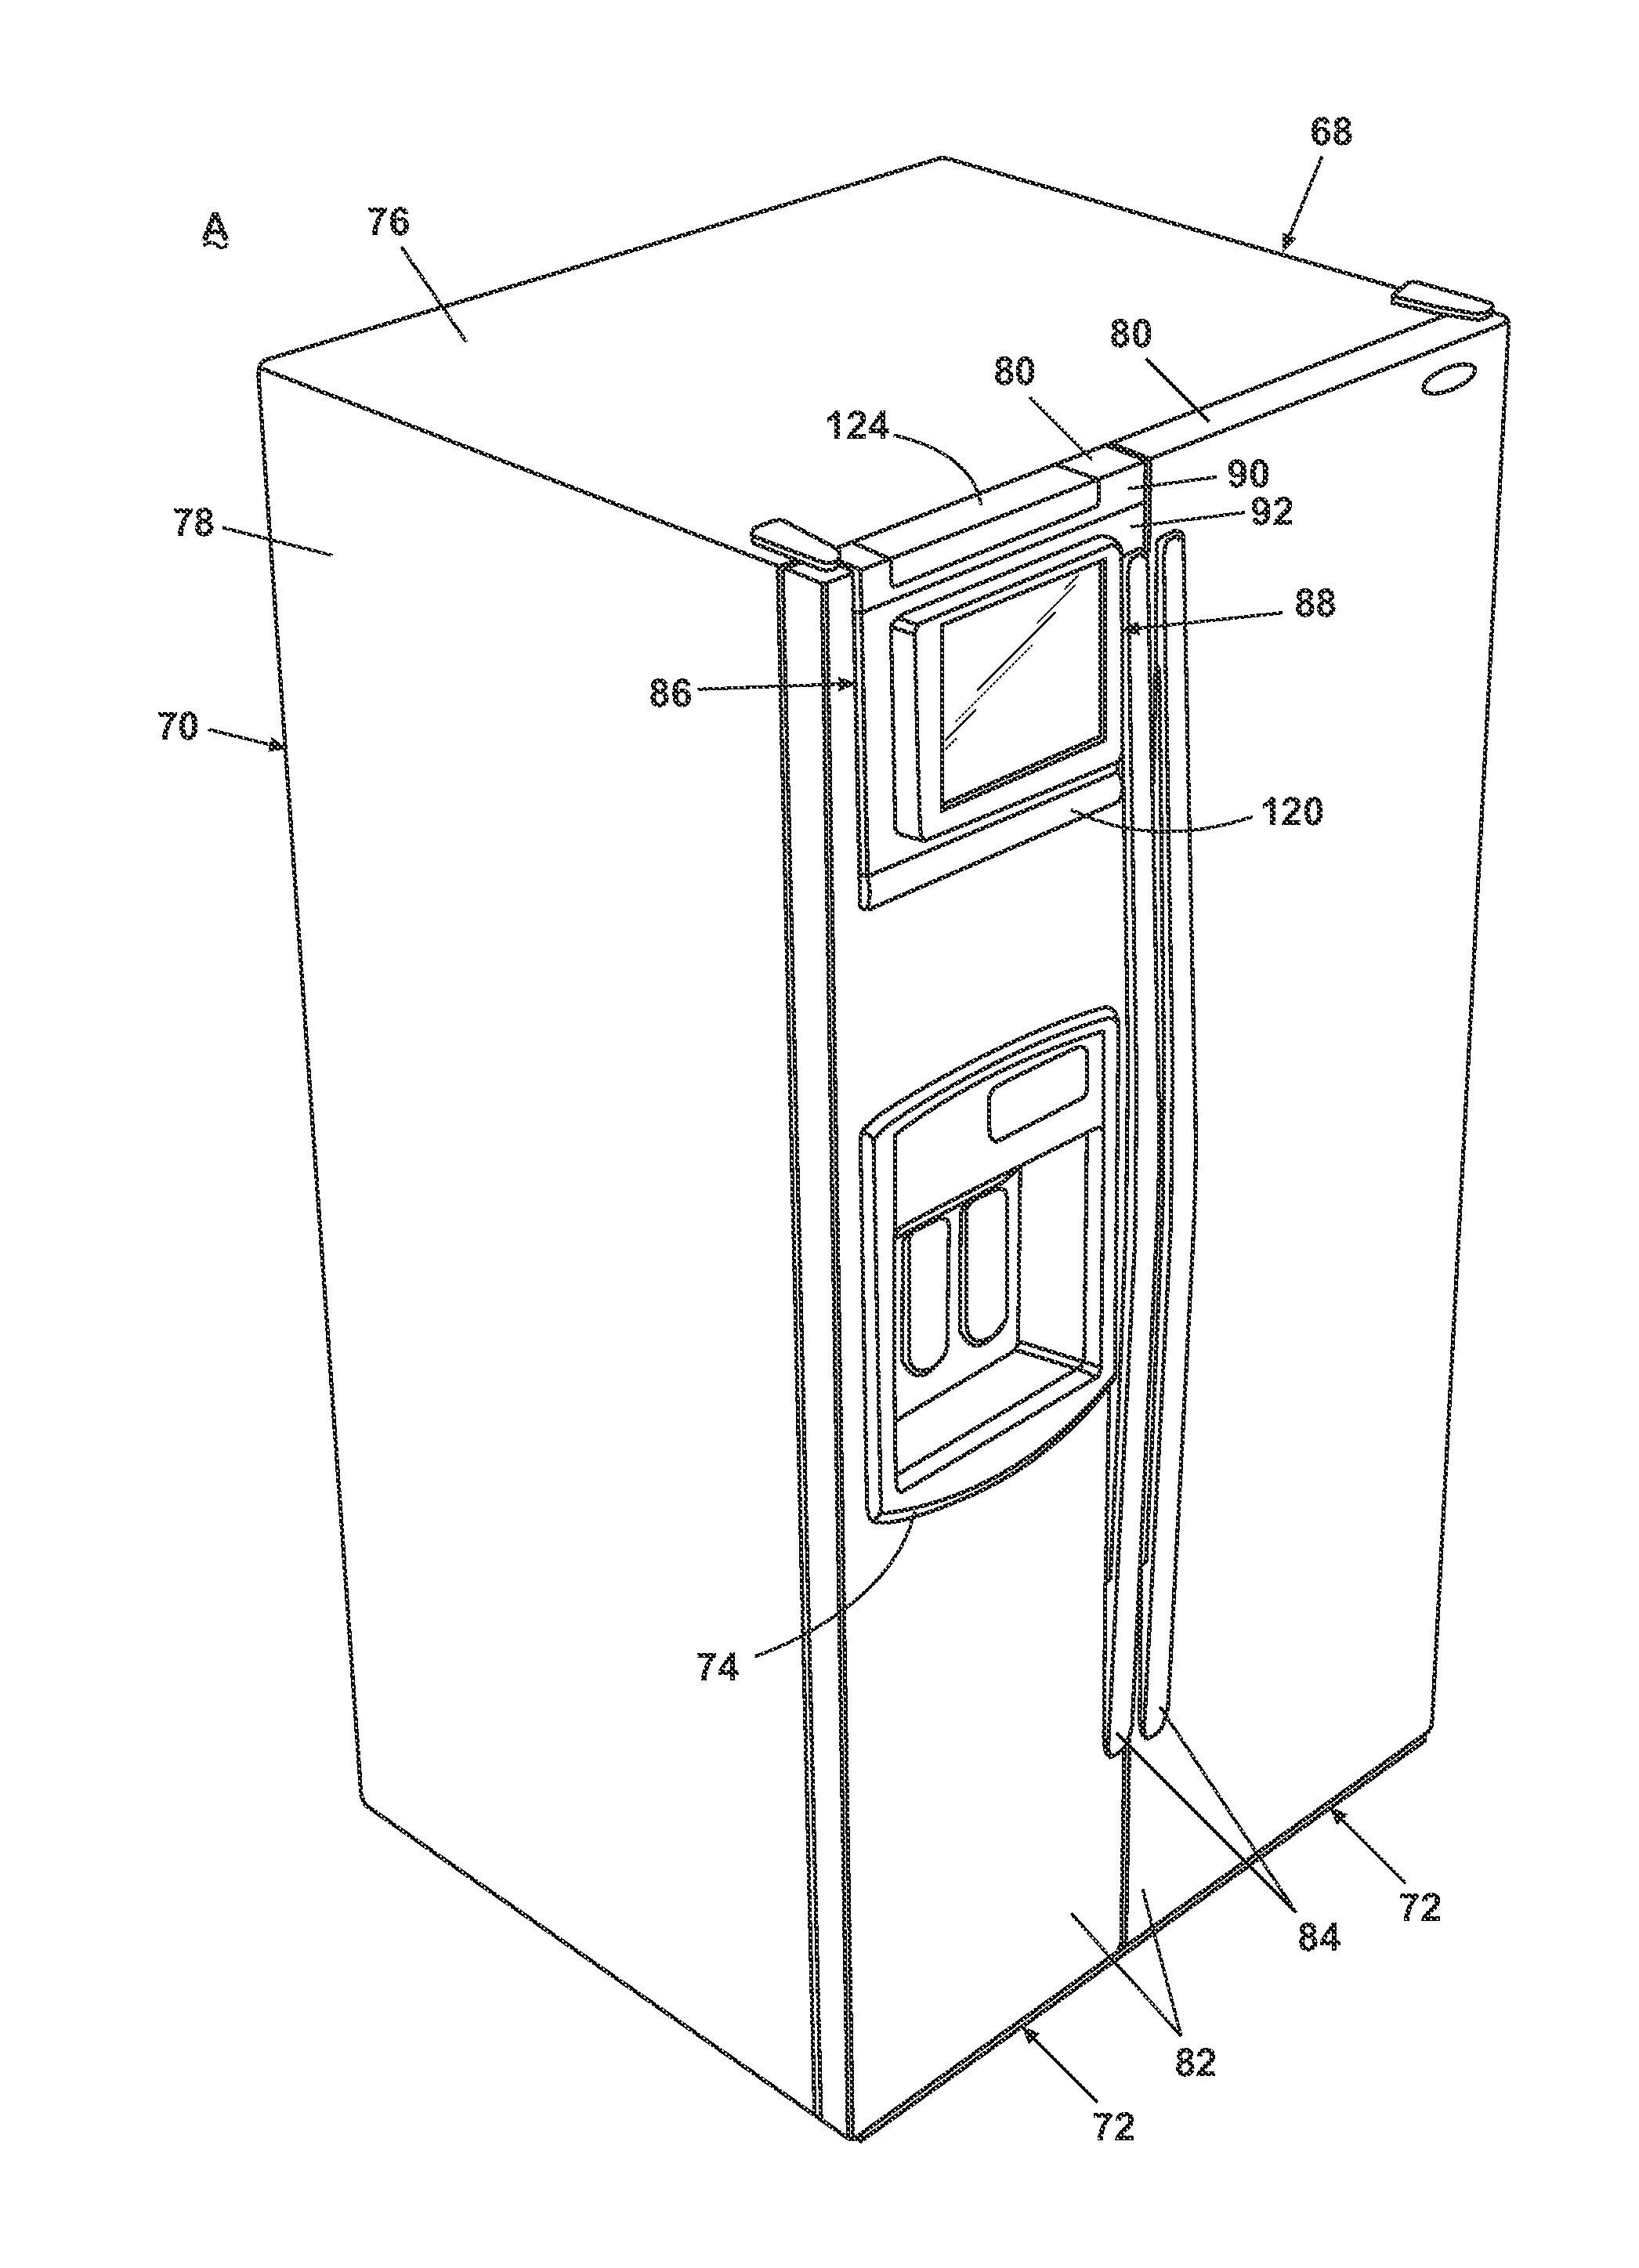 System for Supplying Service From an Appliance To Multiple Consumer Electronic Devices